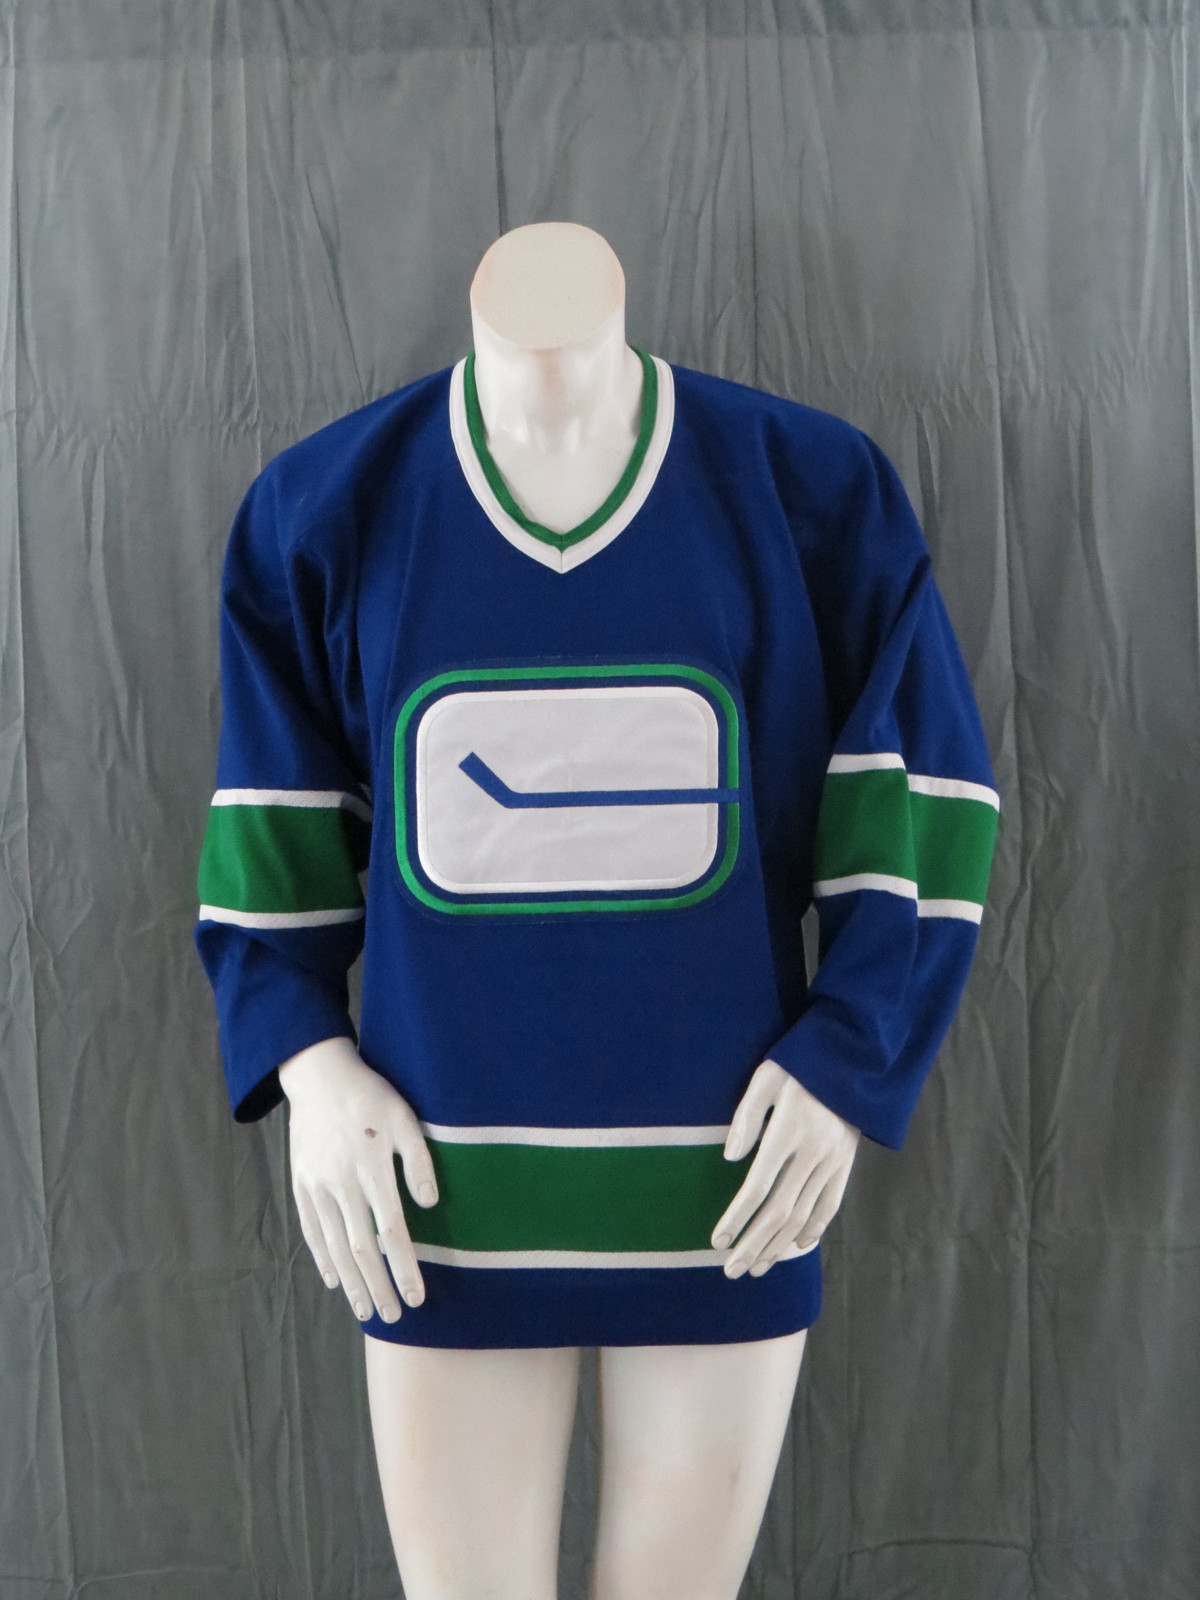 Primary image for Vancouver Canucks Jersey - Original Stick and Rink Logo Away by CCM -Mens Medium